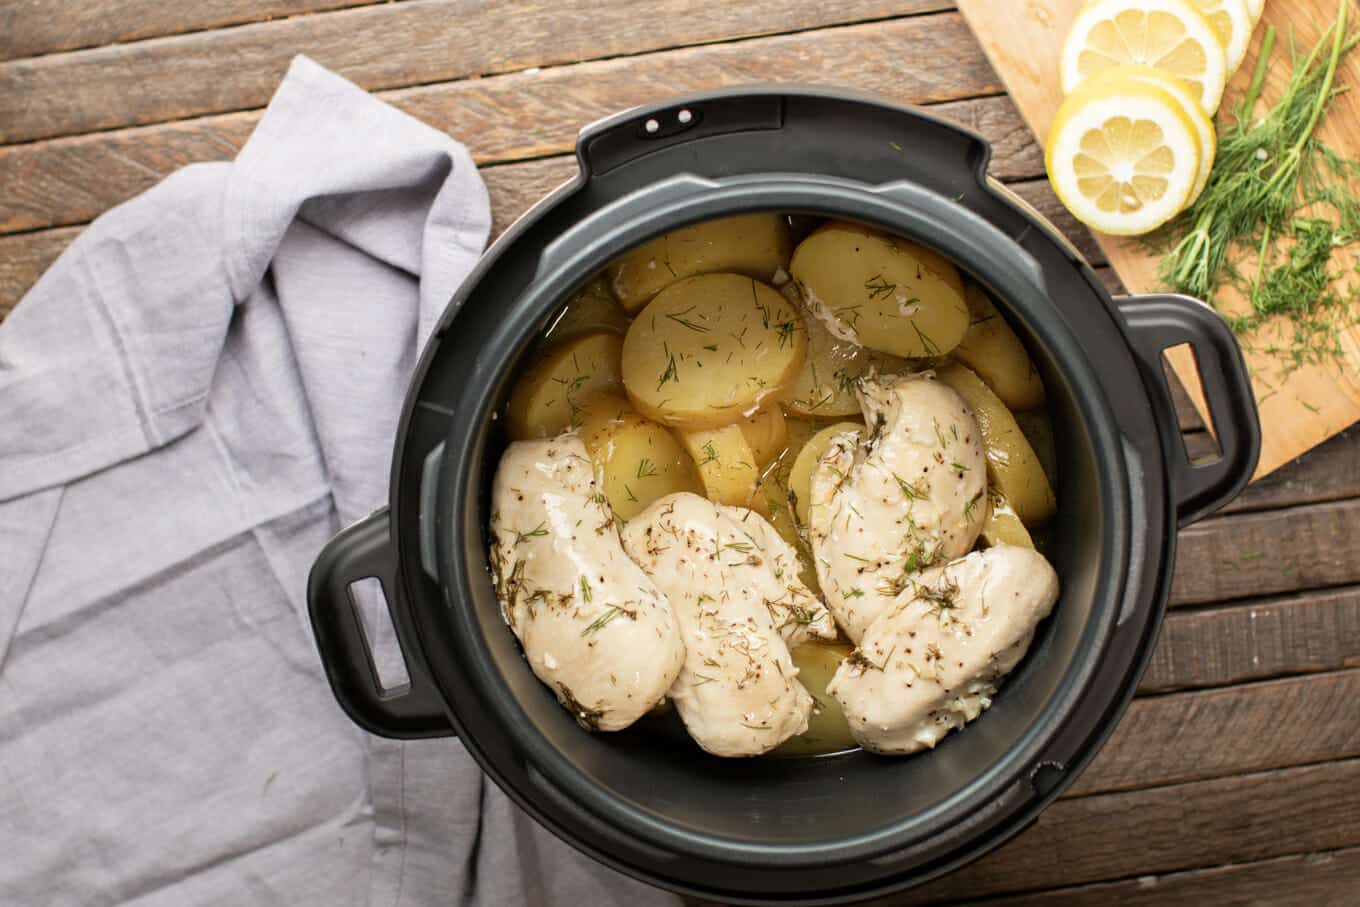 lemon chicken, gold potatoes and dill in a pressure cooker.